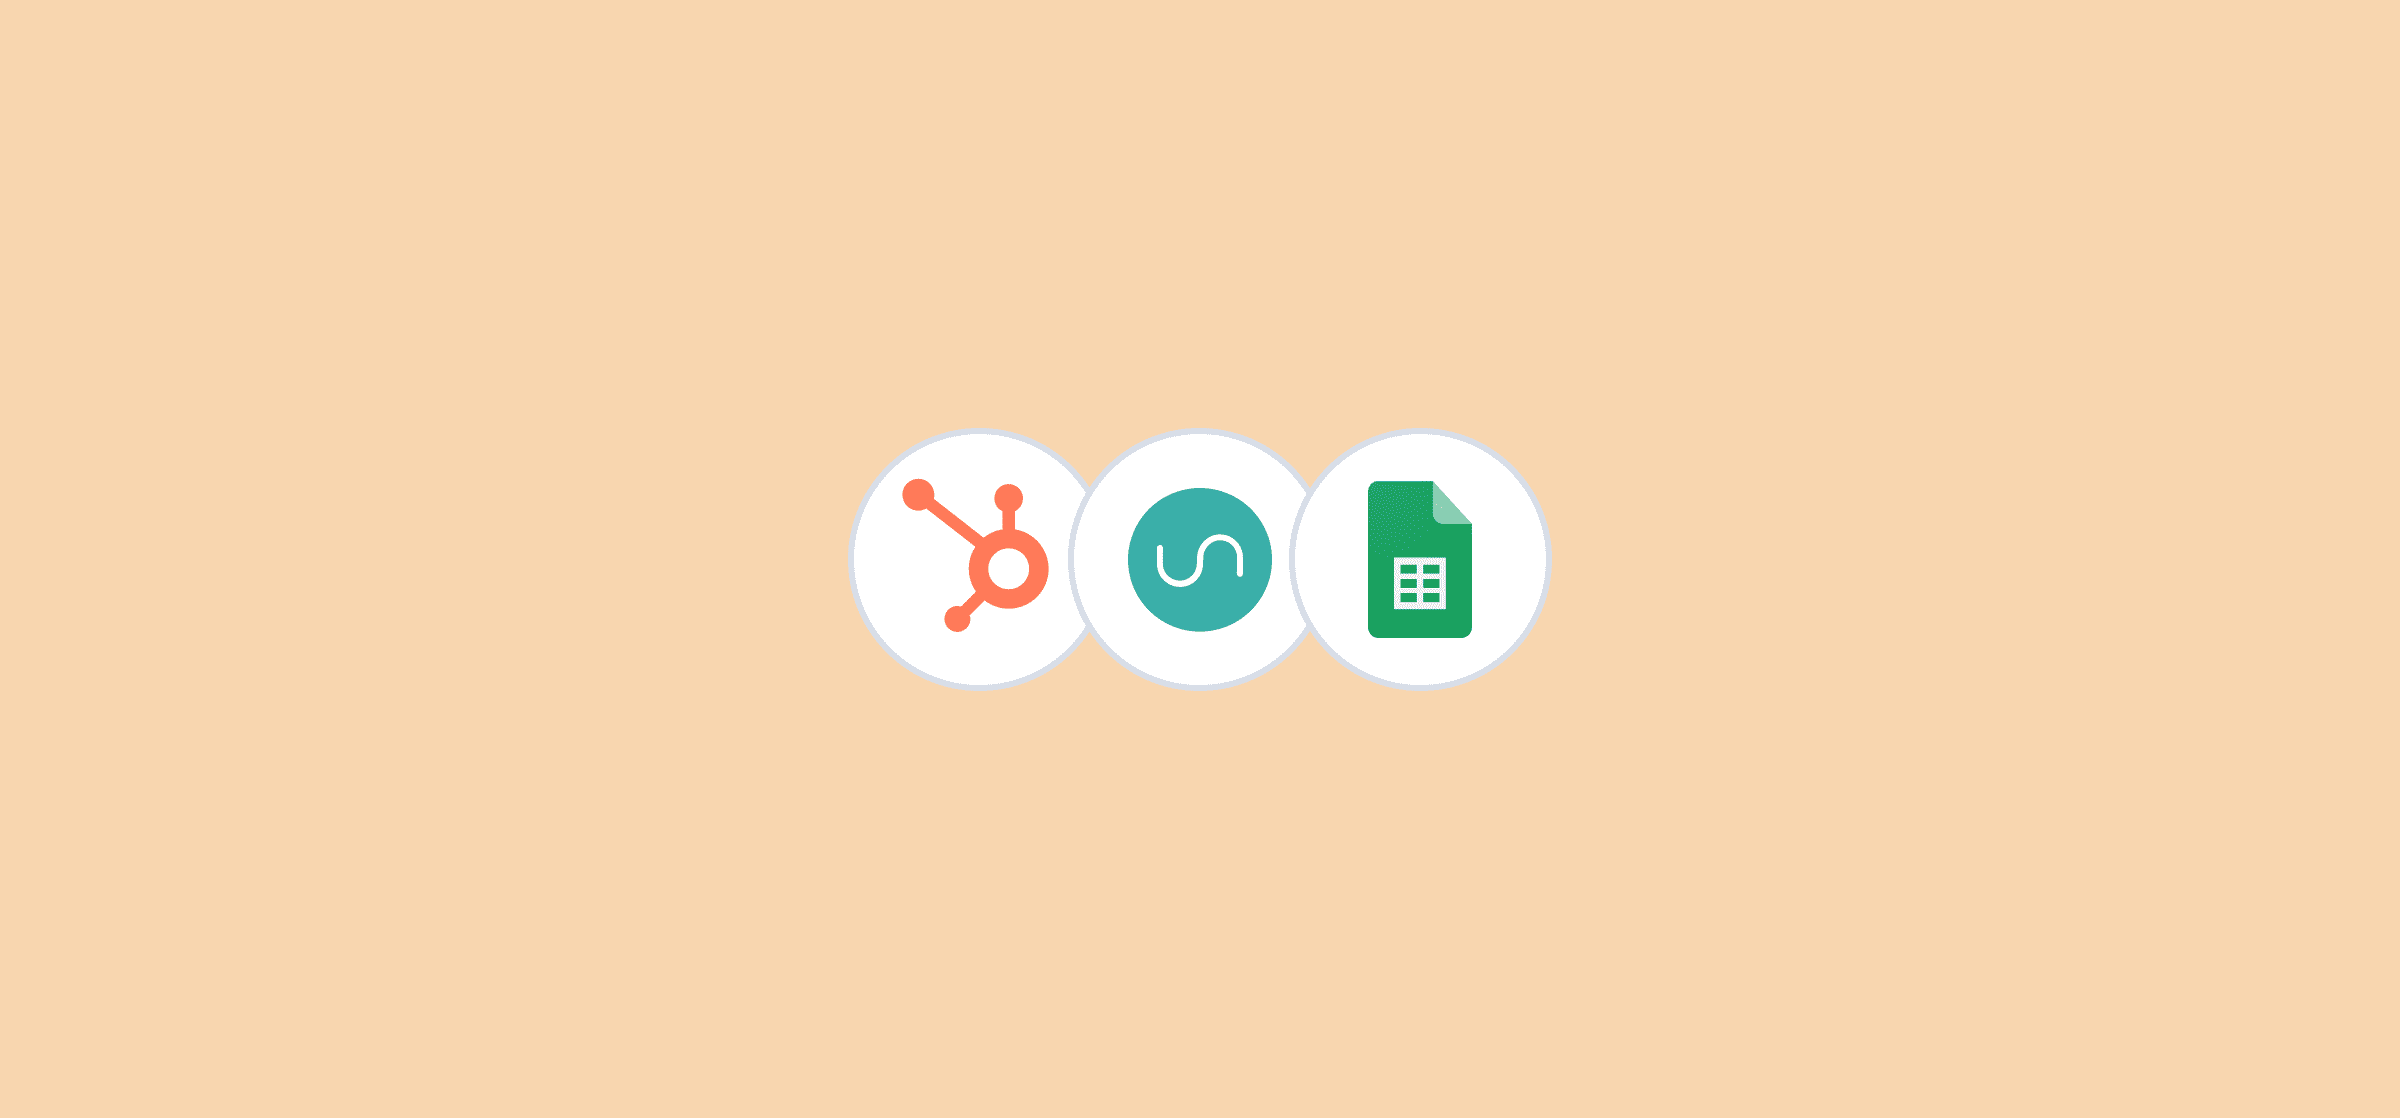 Logos for HubSpot, Unito, and Google Sheets, representing a template that automates sales reporting.